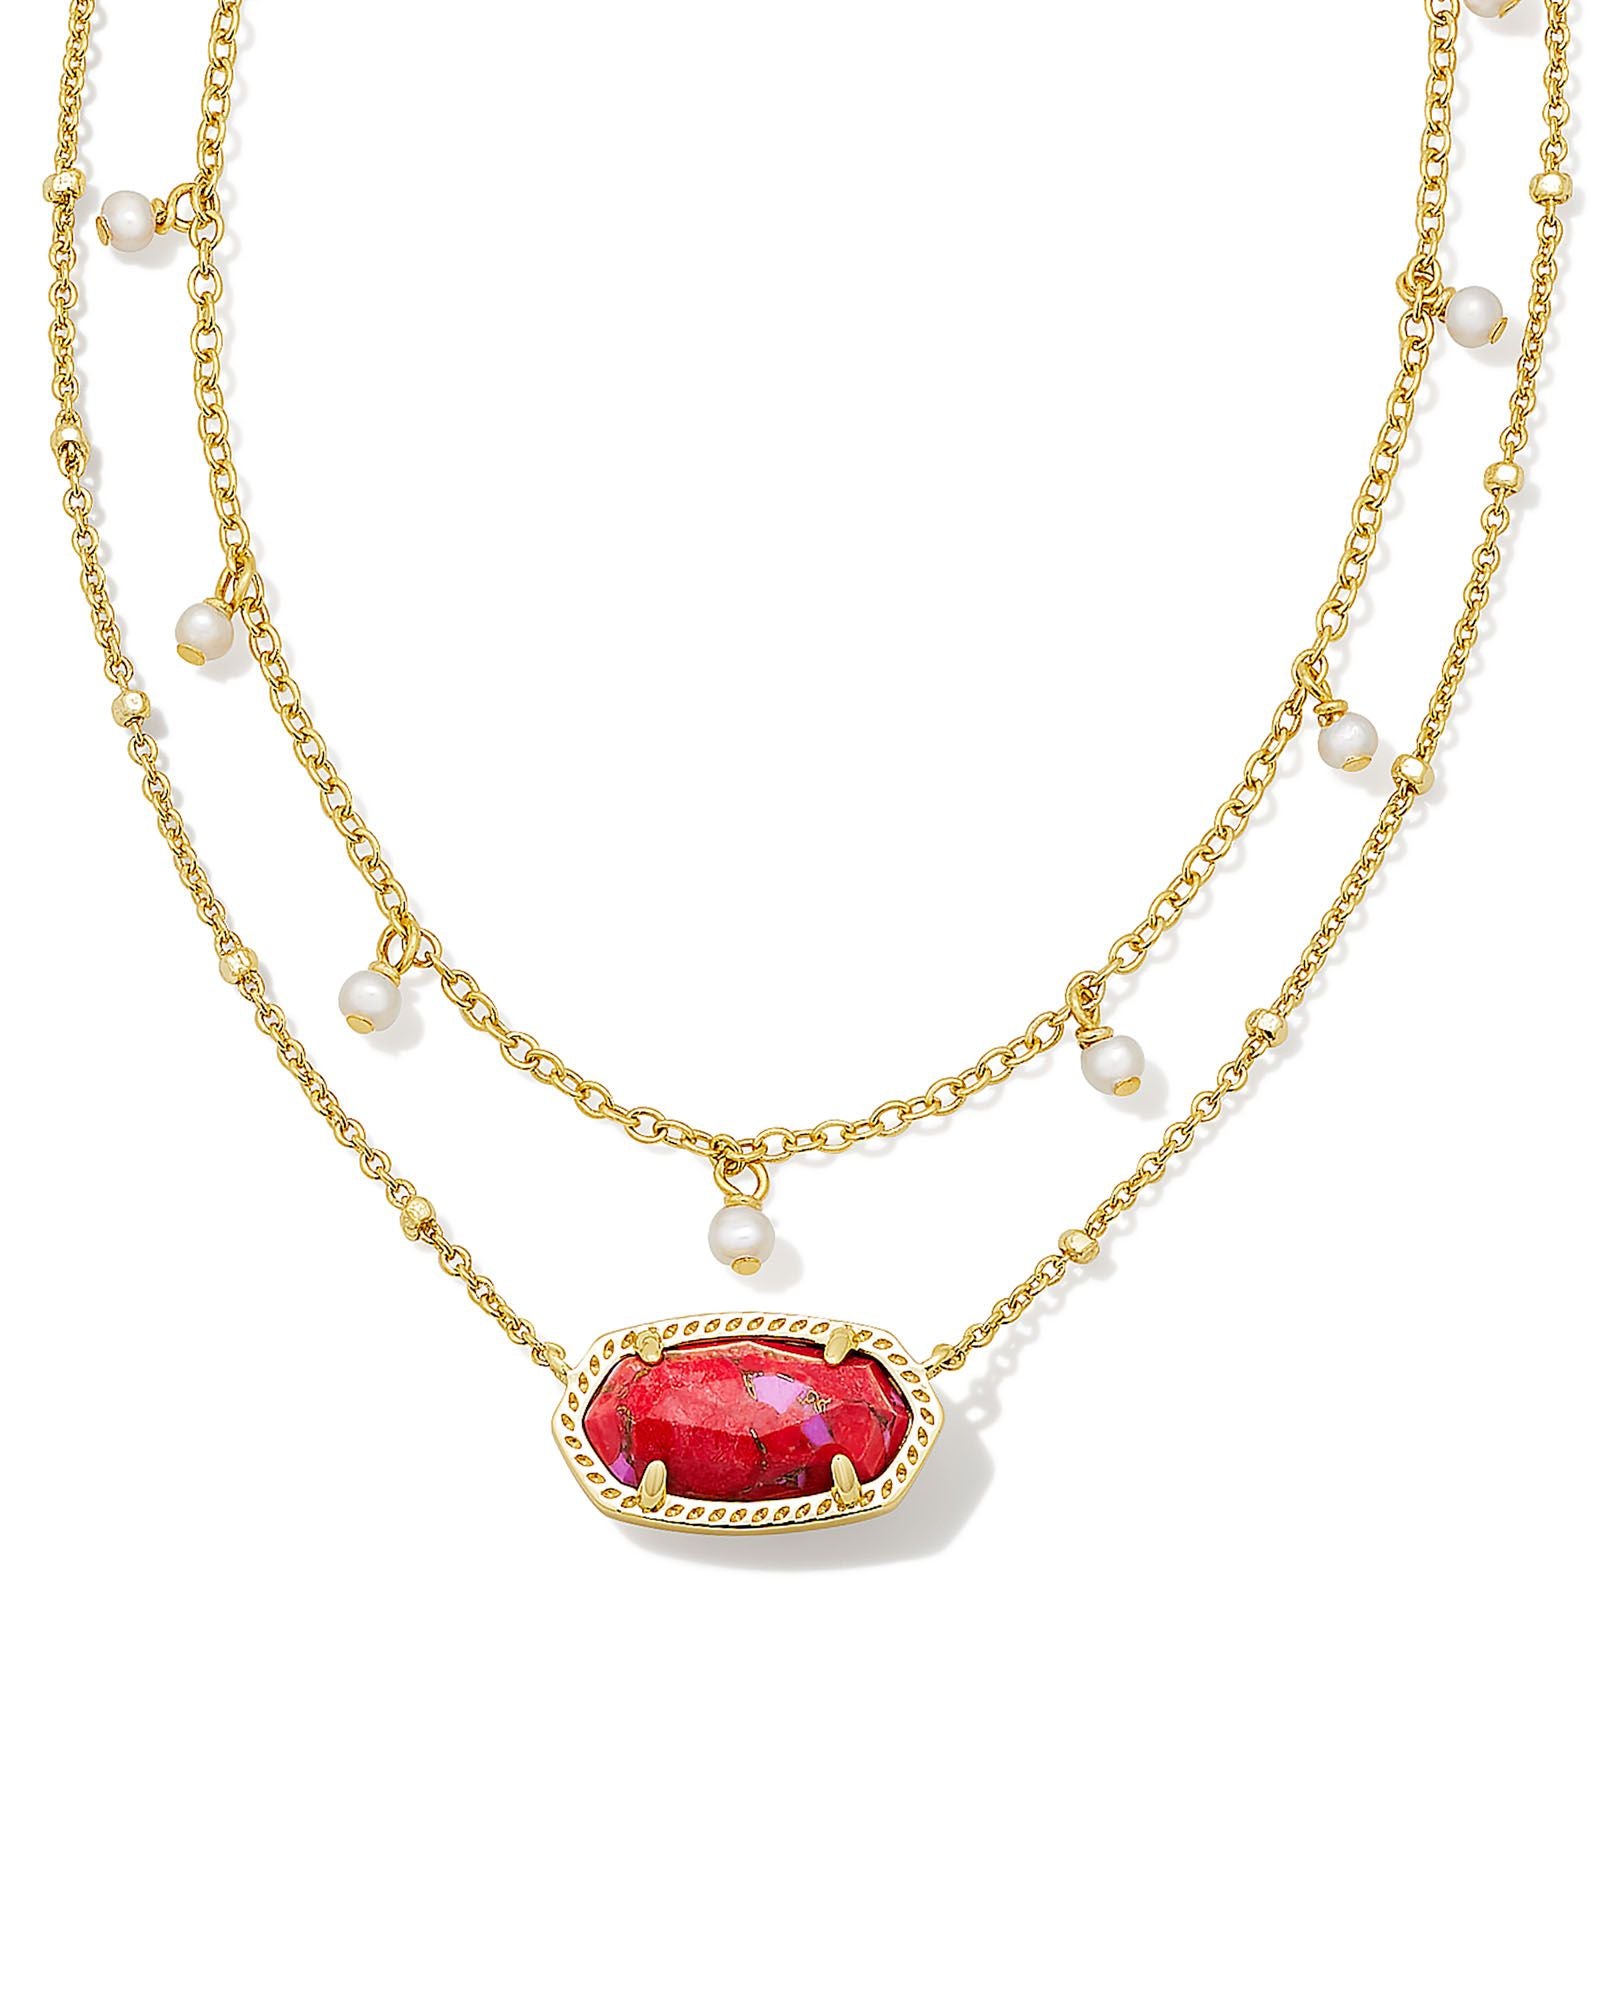 Elisa Pearl Multi Strand Necklace in Gold Bronze Veined Red and Fuchsia Magnesite